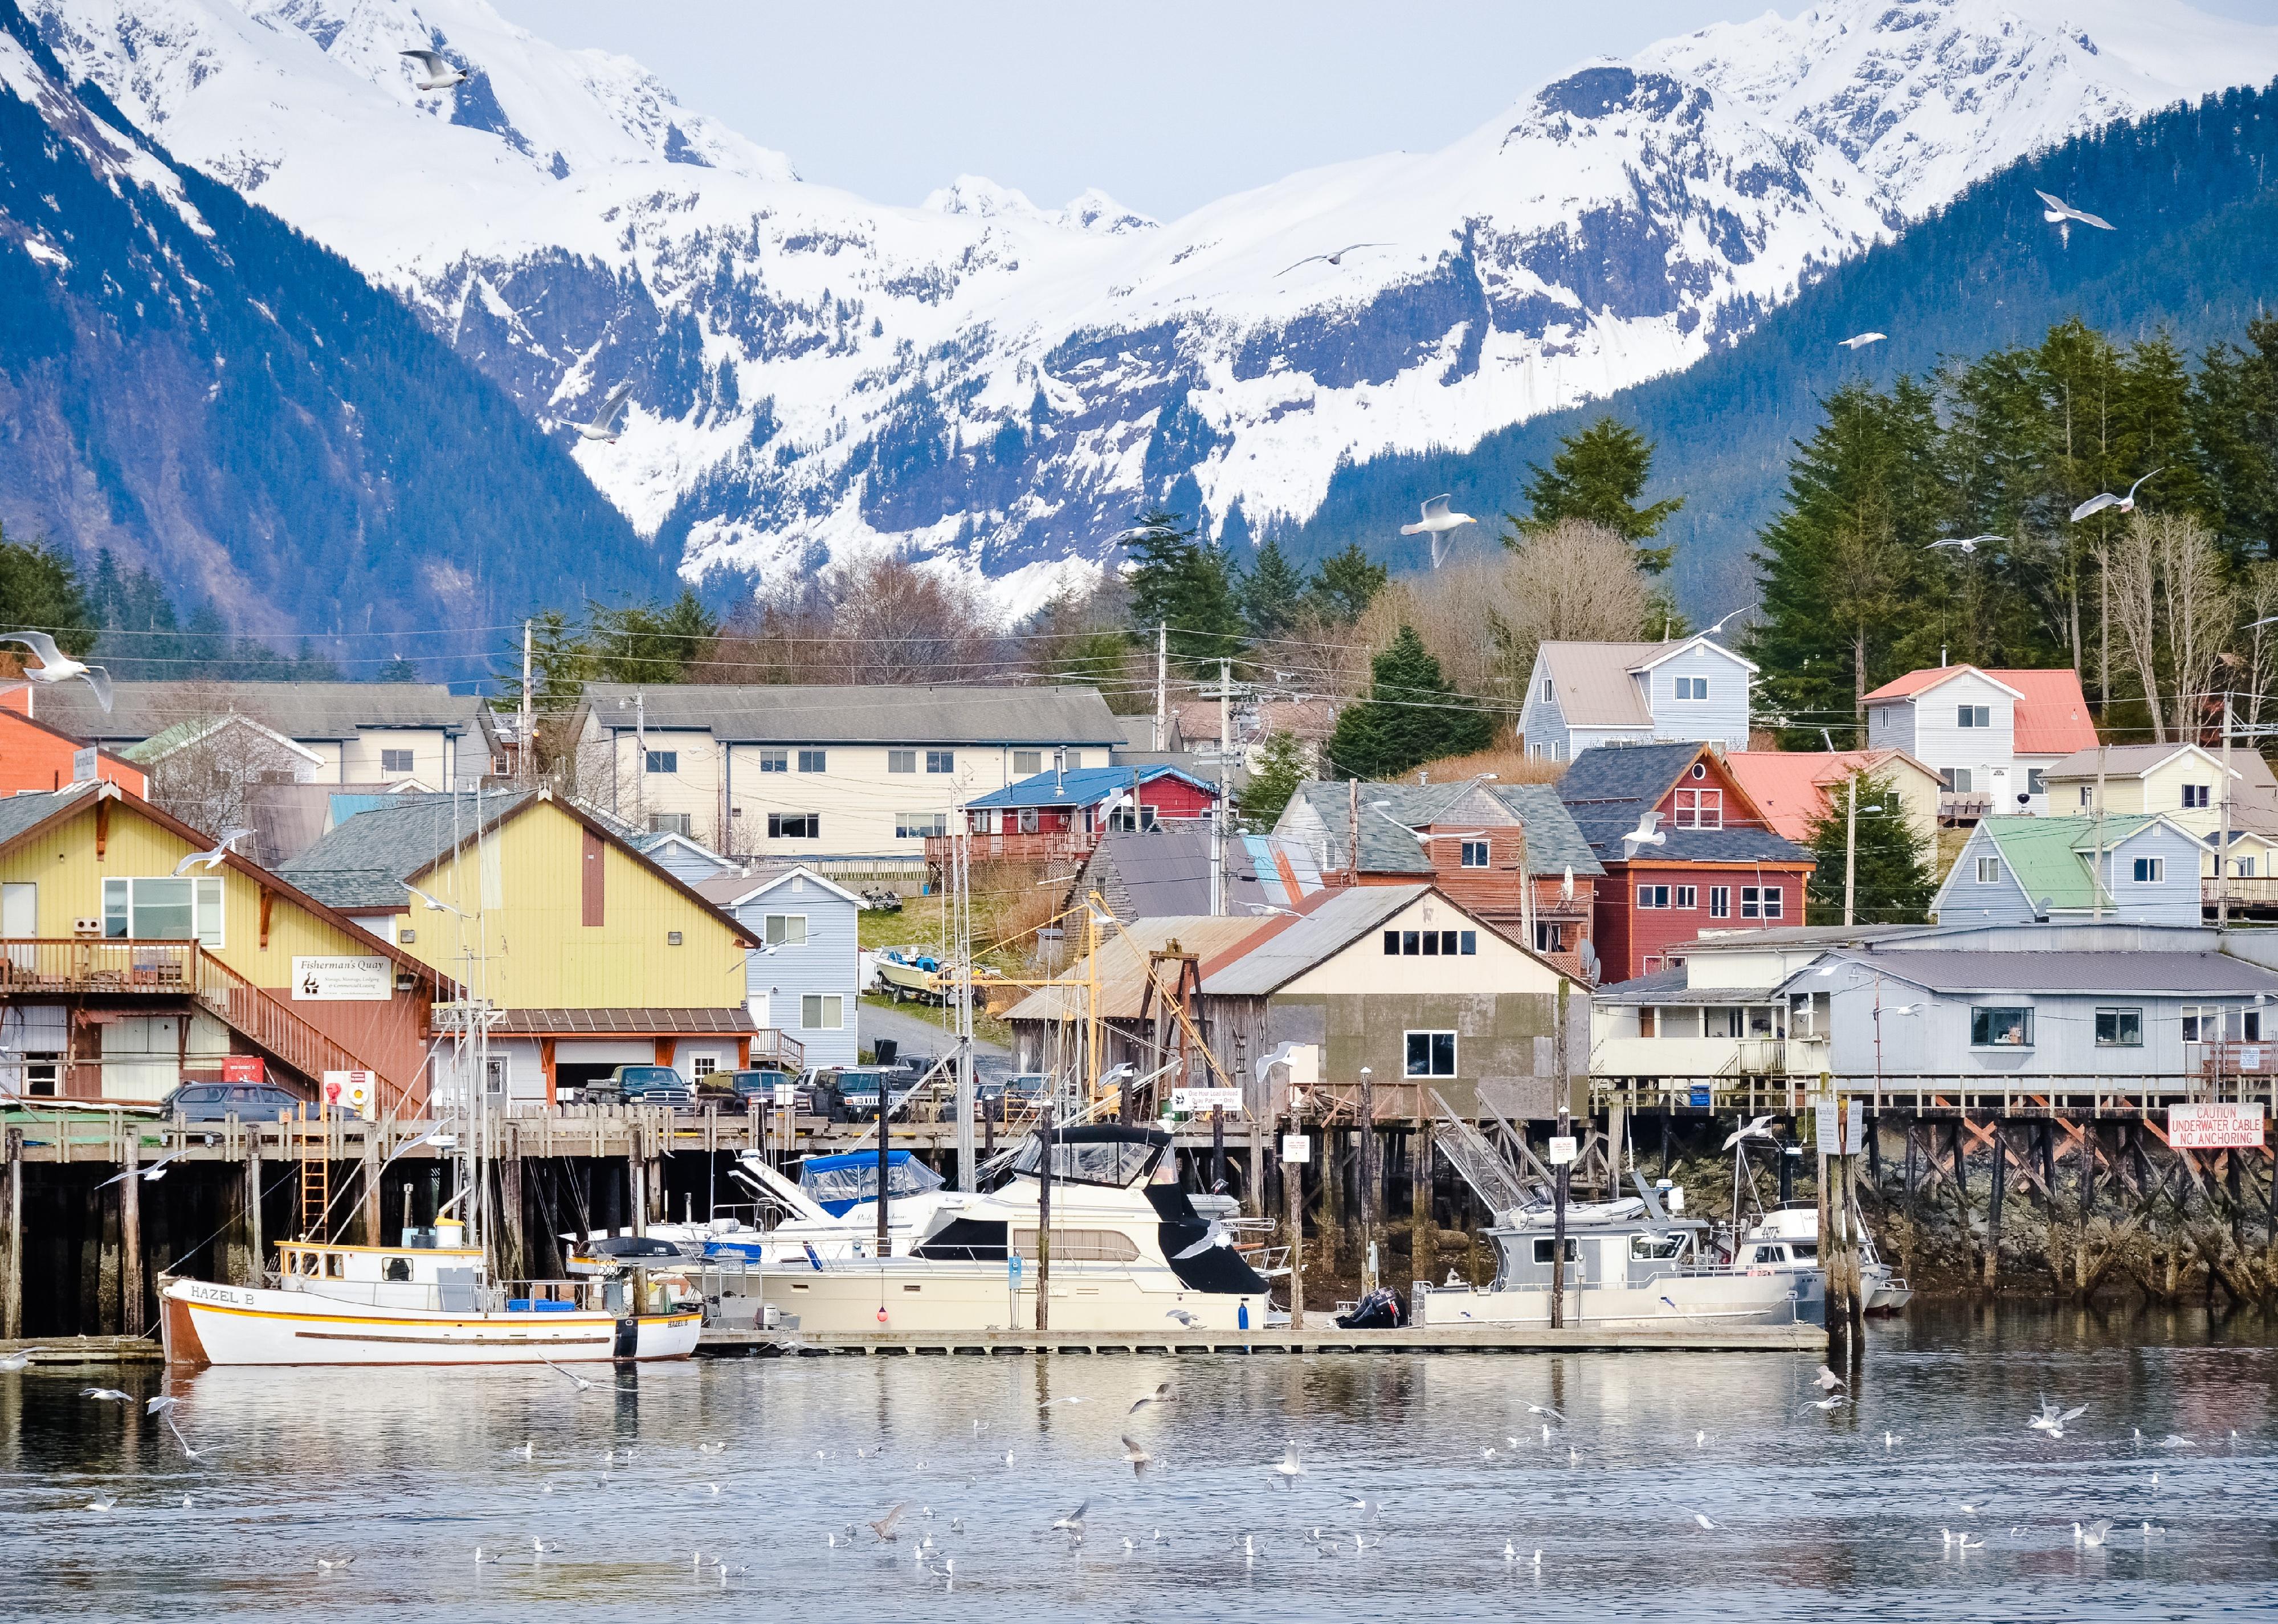 View of Sitka, boats and buildings from the water.